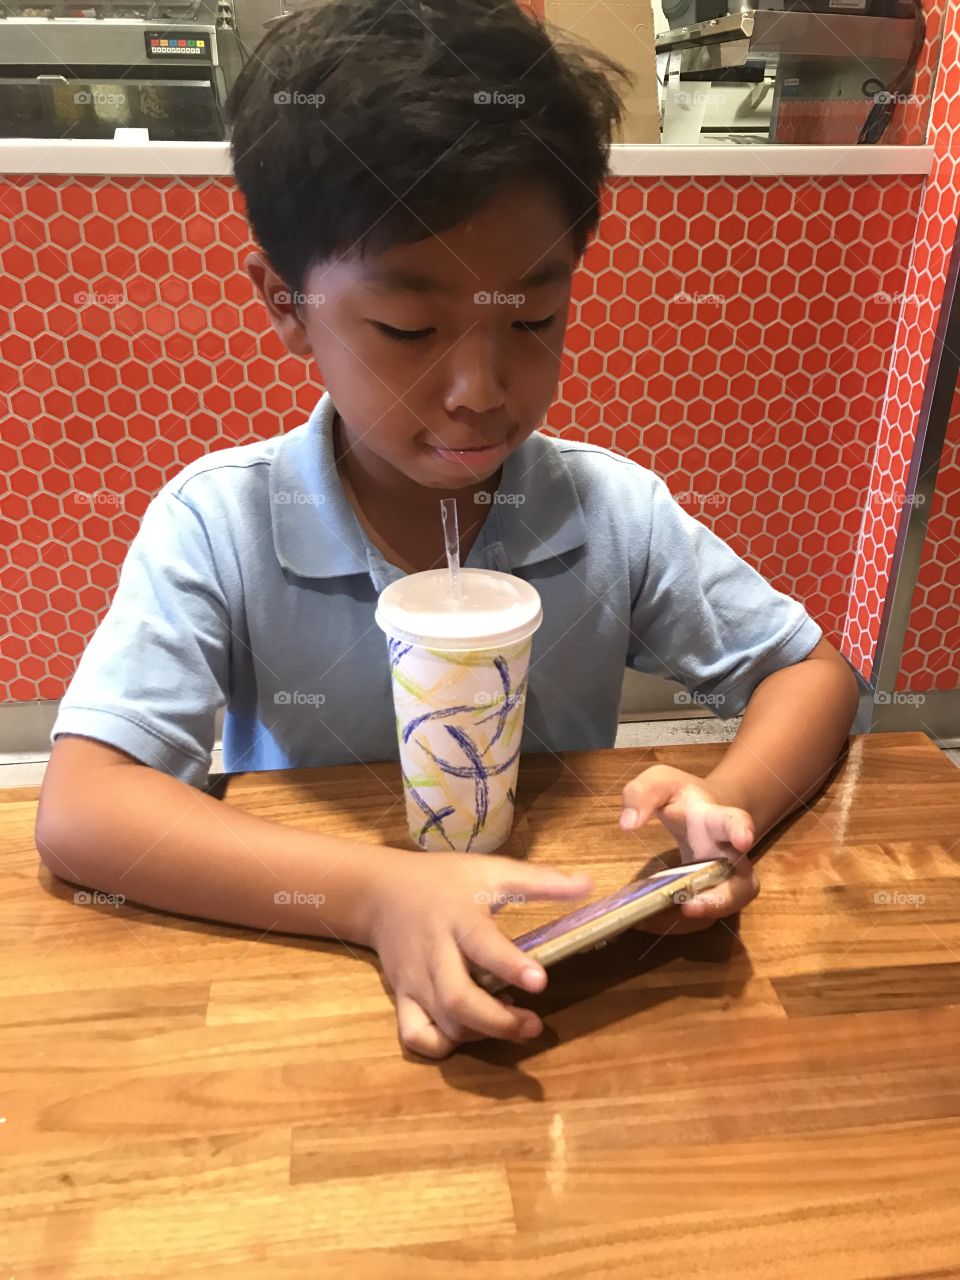 Kid and his phone